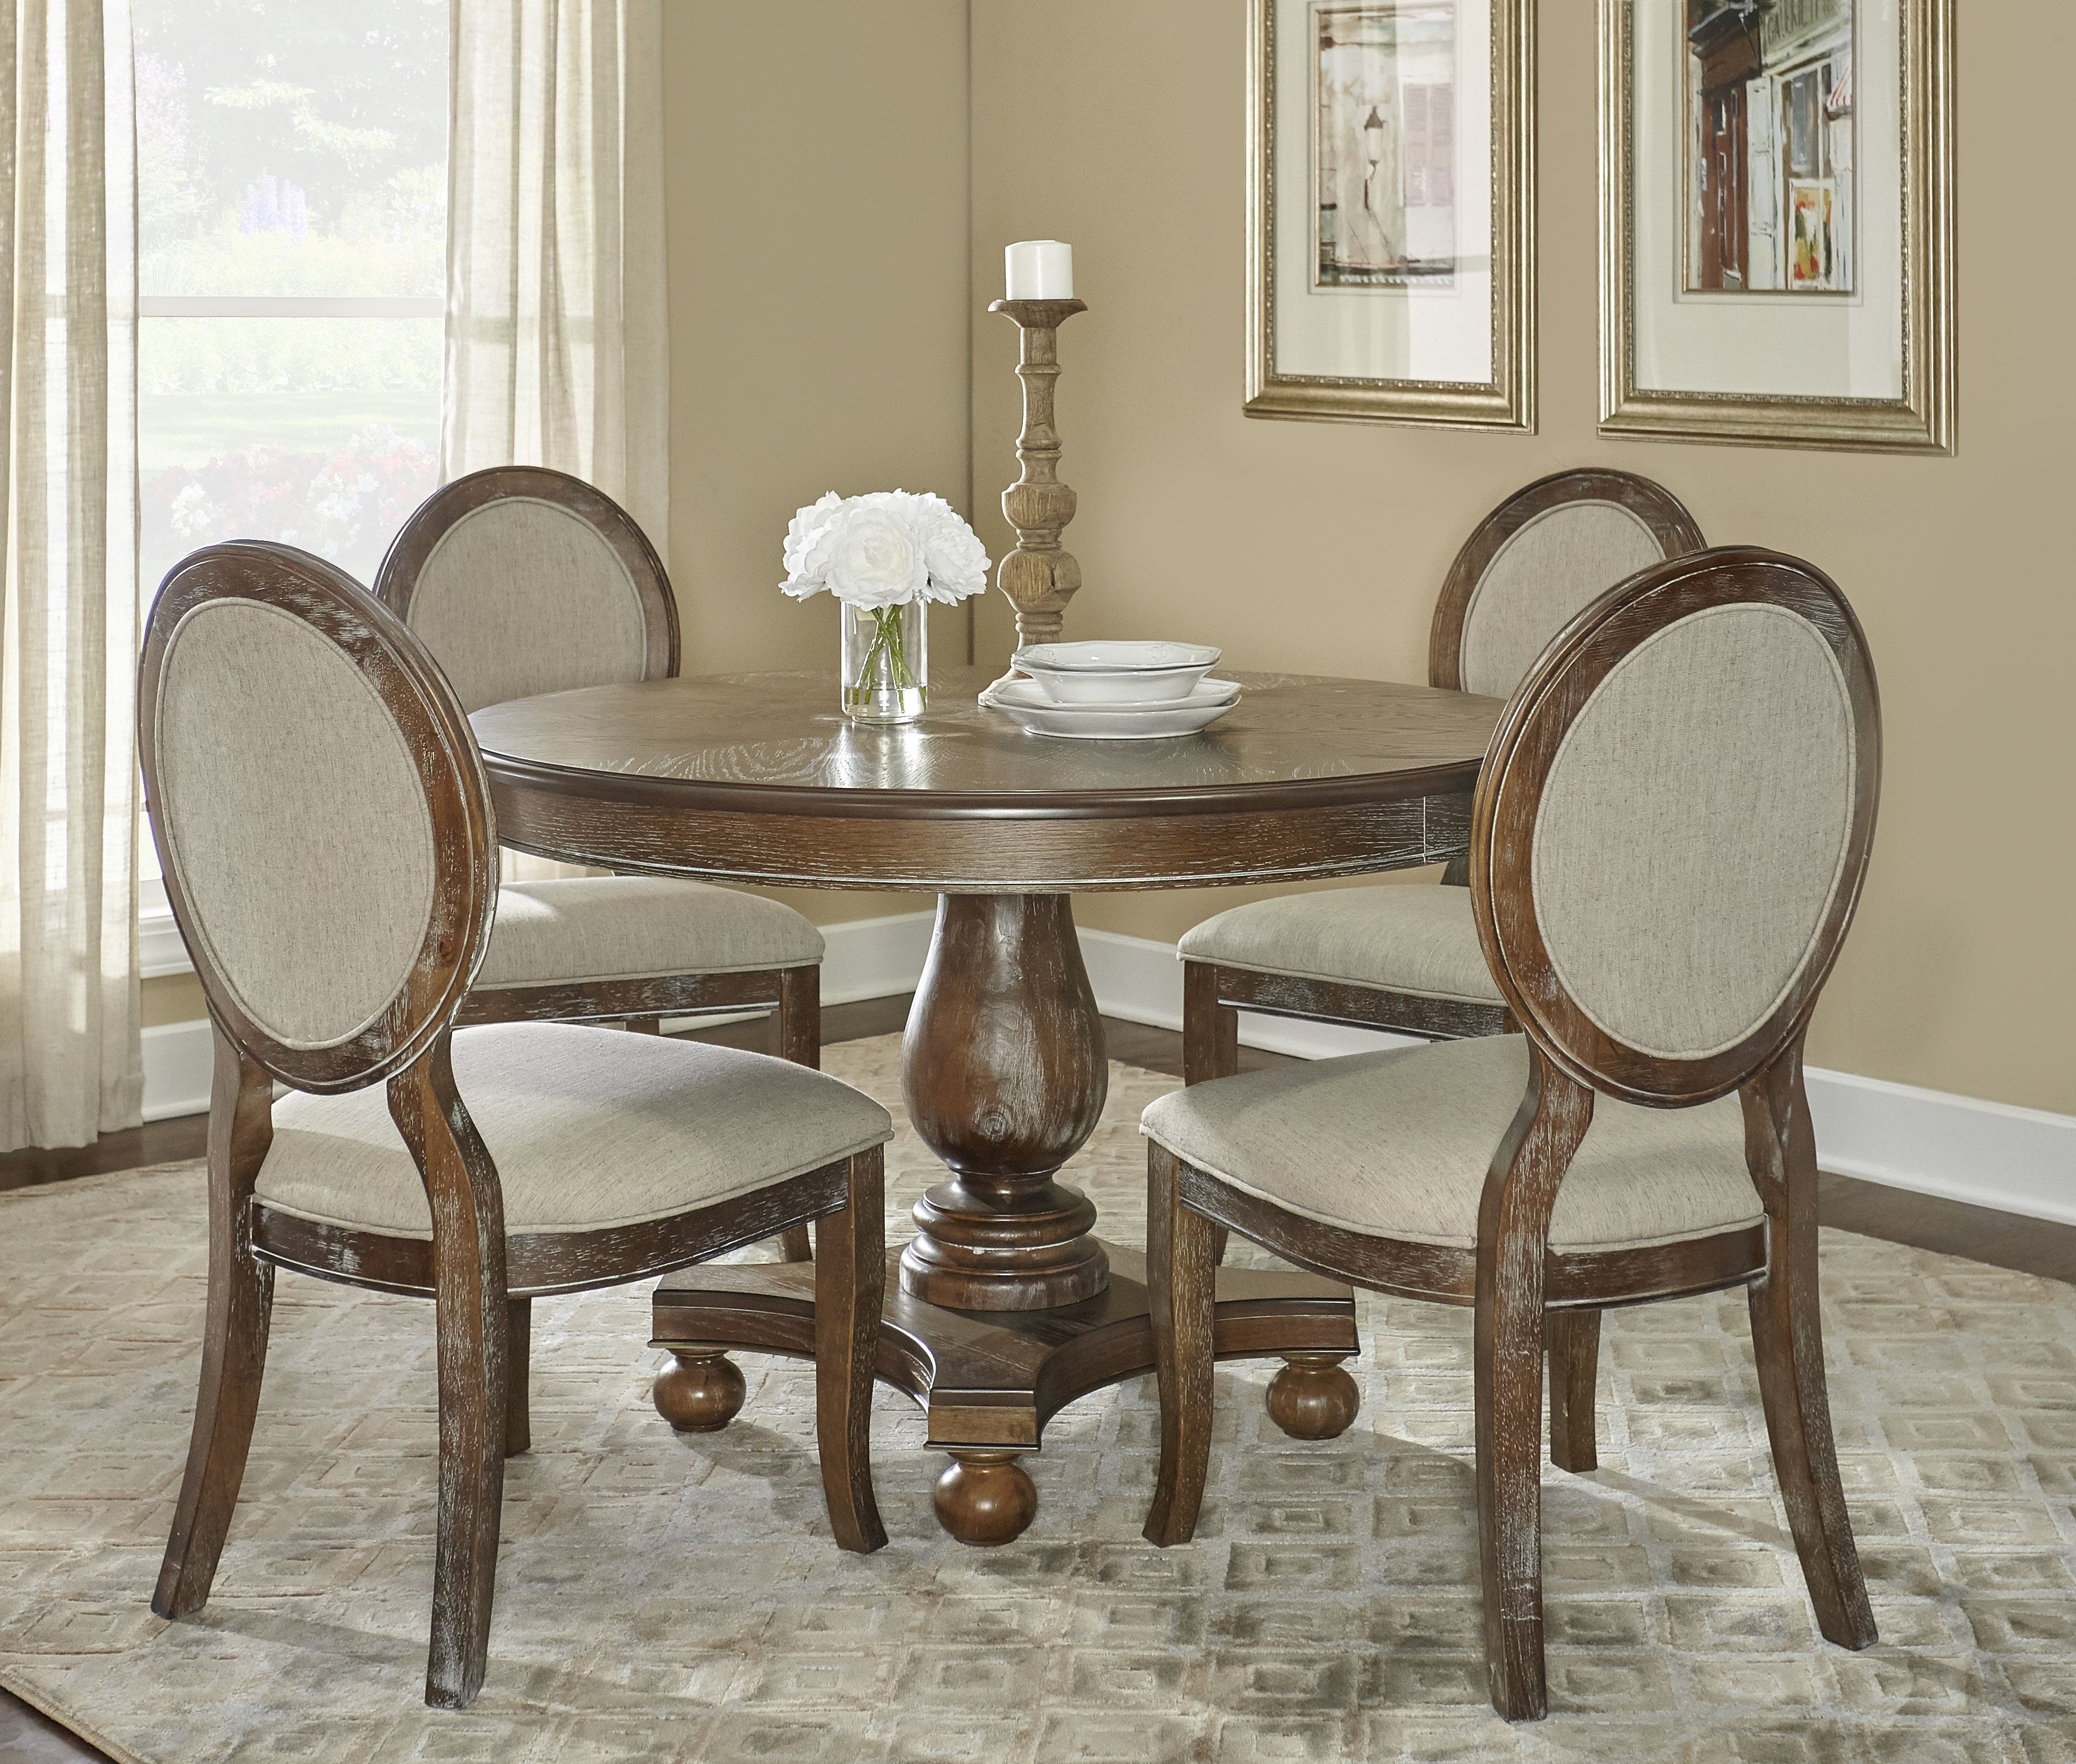 One Allium Way Hallows Creek 5 Piece Dining Set & Reviews | Wayfair Pertaining To Recent Caira 7 Piece Rectangular Dining Sets With Upholstered Side Chairs (View 9 of 20)